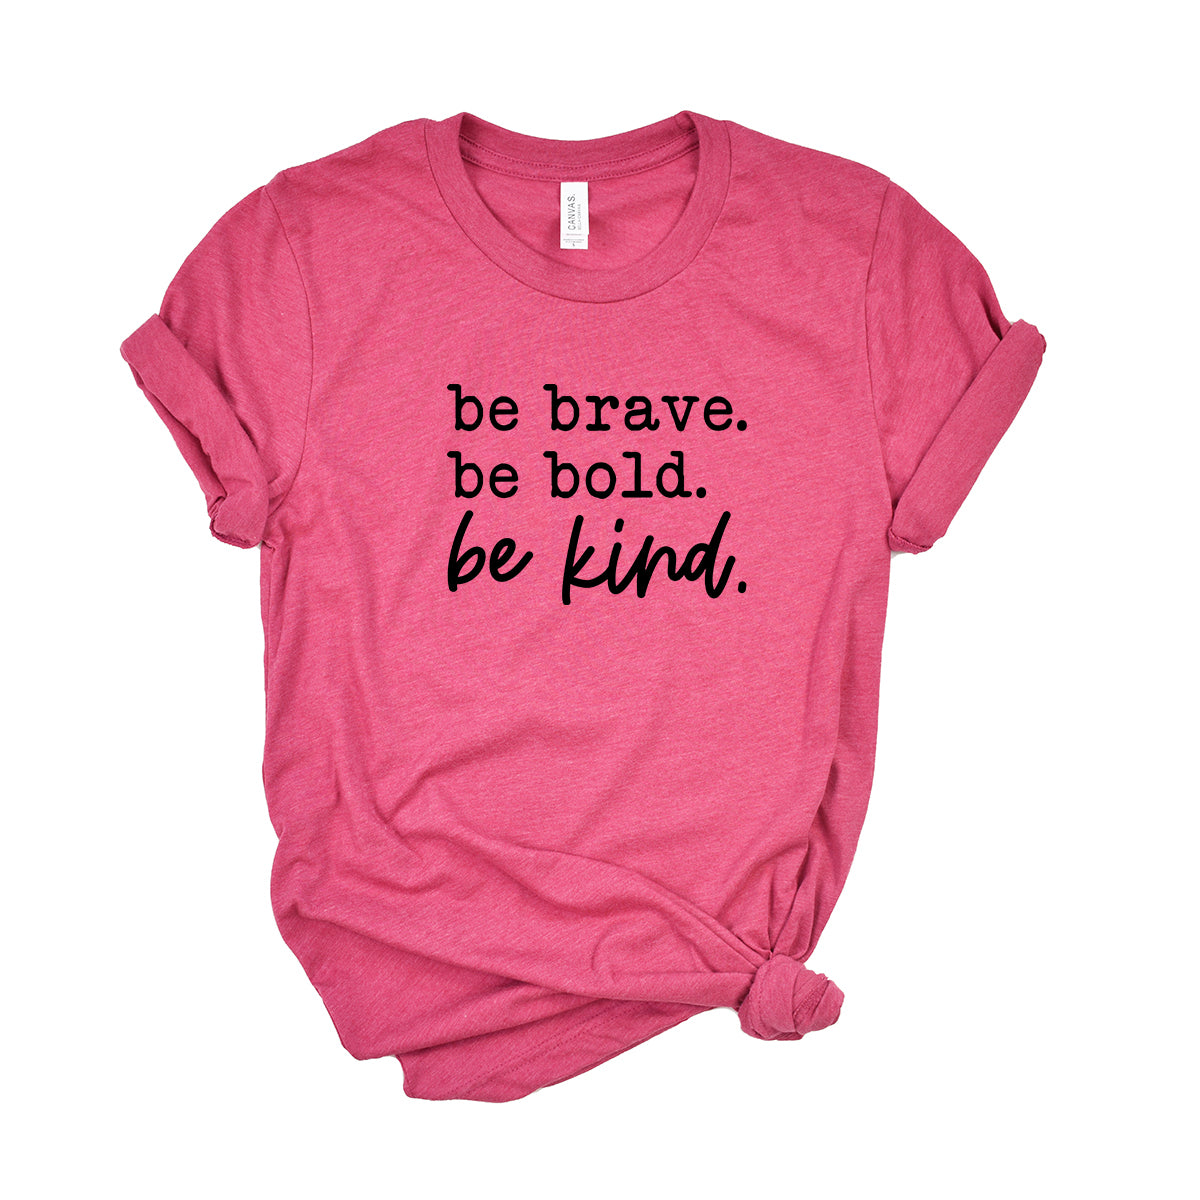 Be Bold. Be Brave. Be Kind. | Short Sleeve Crew Neck